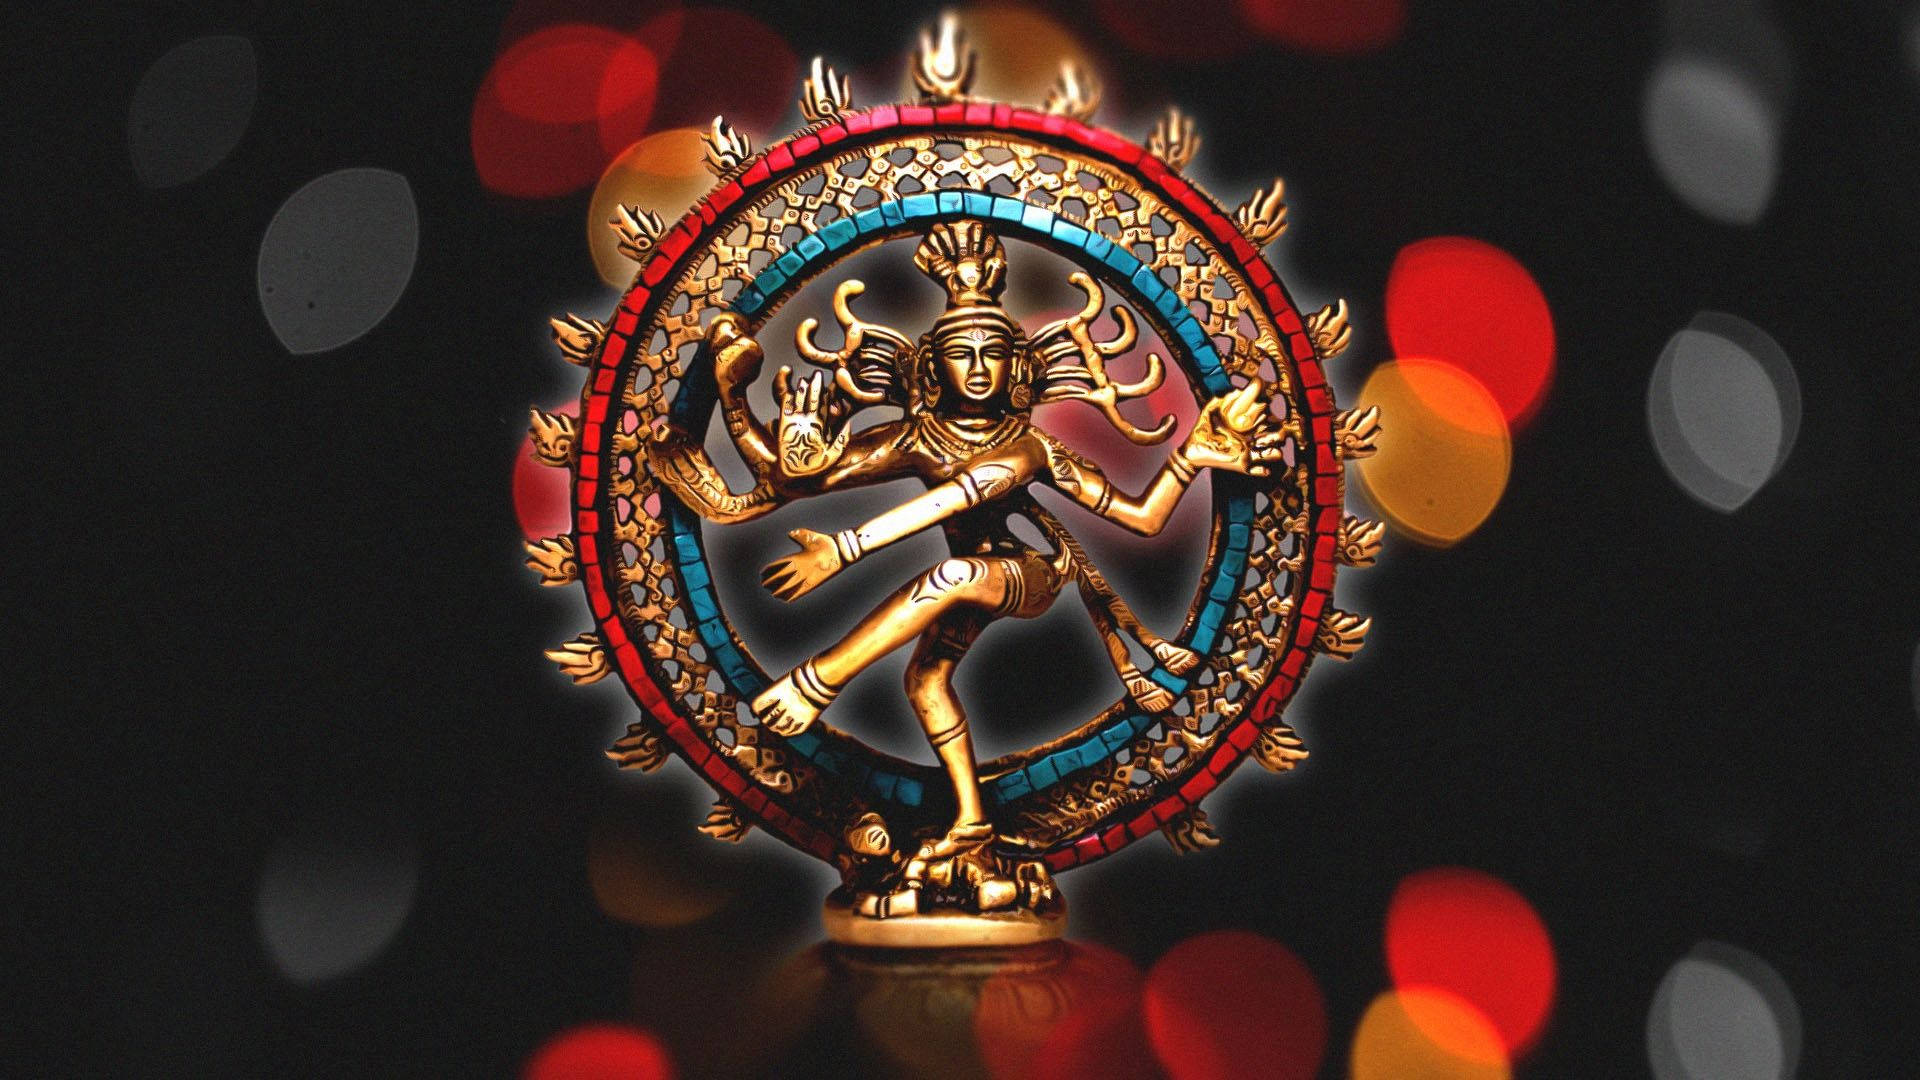 Vibrant Colors Of Nataraja: The Dance Of Creation And Destruction